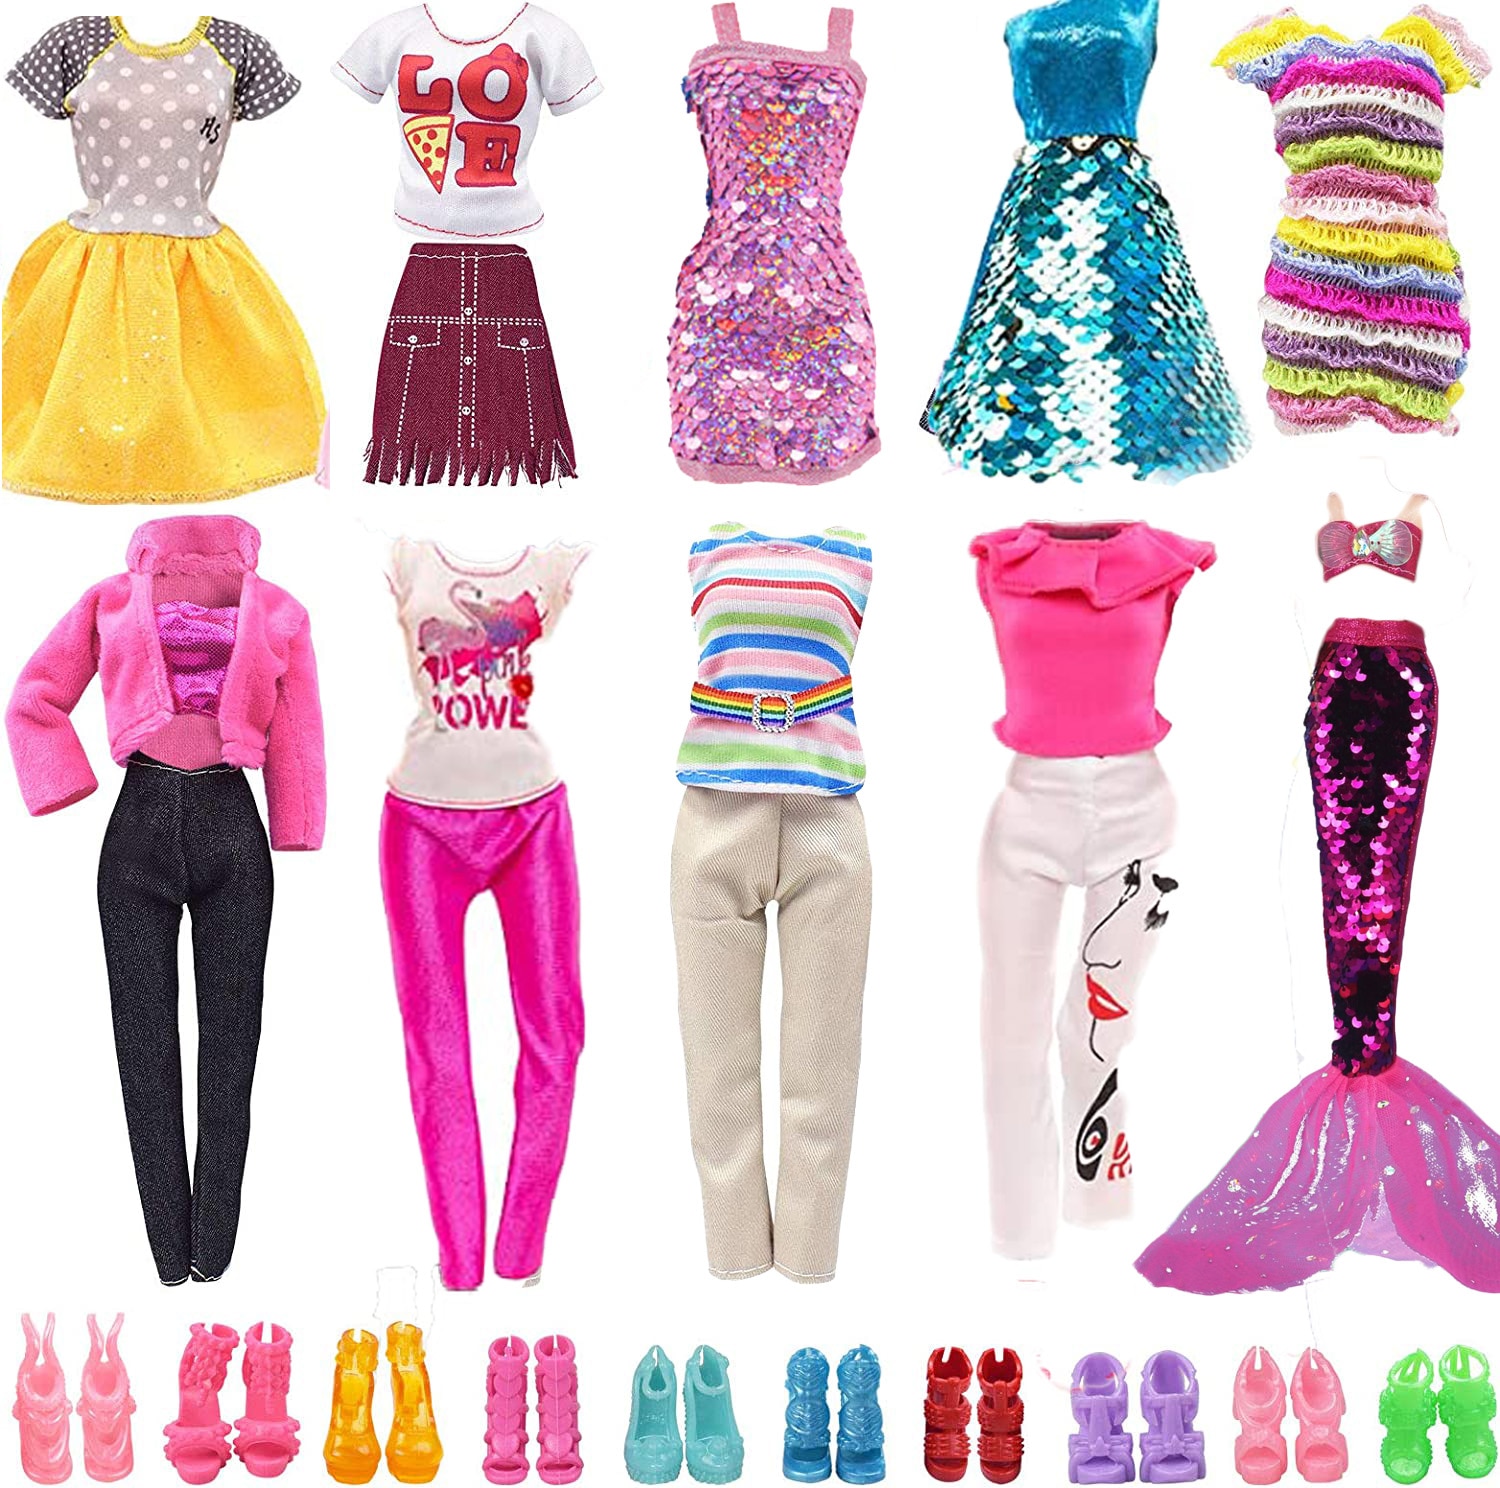 Newest Fashion Handmade 6 Items Lot Doll Accessories Freeshipping 3 Doll